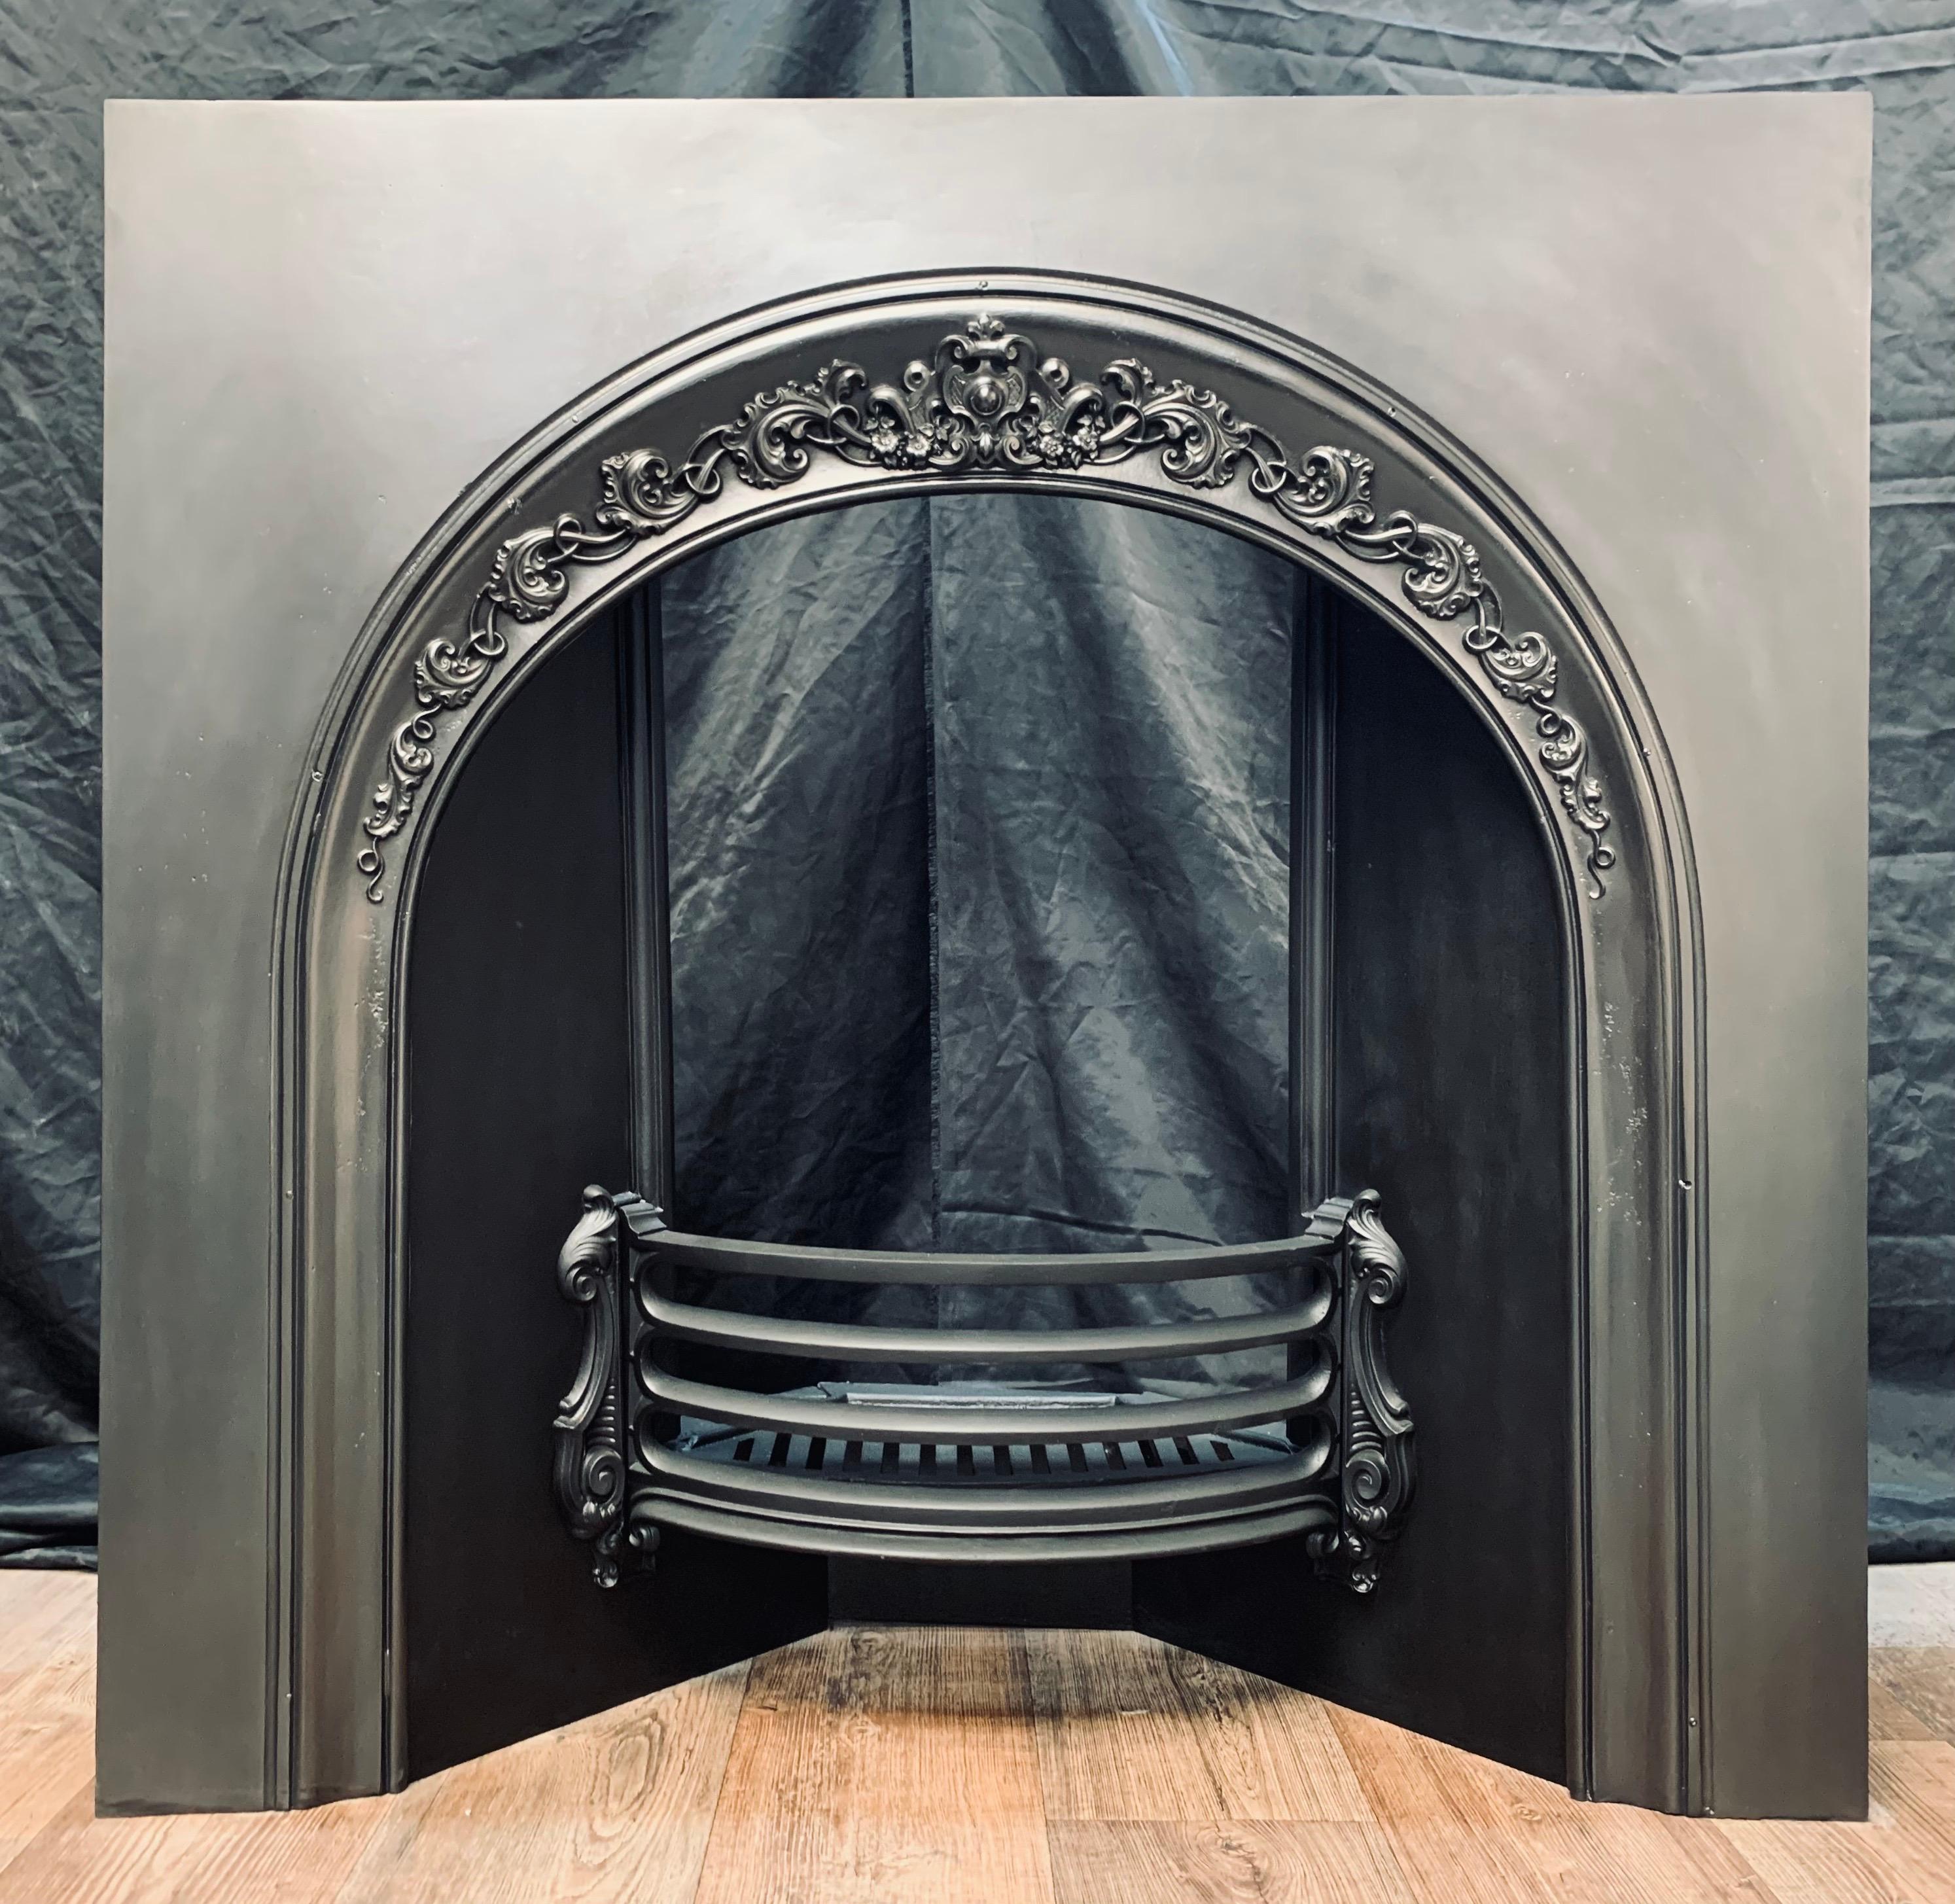 An unusually large mid-19th century Victorian cast iron arched insert from Carron of Falkirk. A generous outer plate with a border cartouche, splayed side returns with mounting points for the curved three barred fire front, the original fire grate